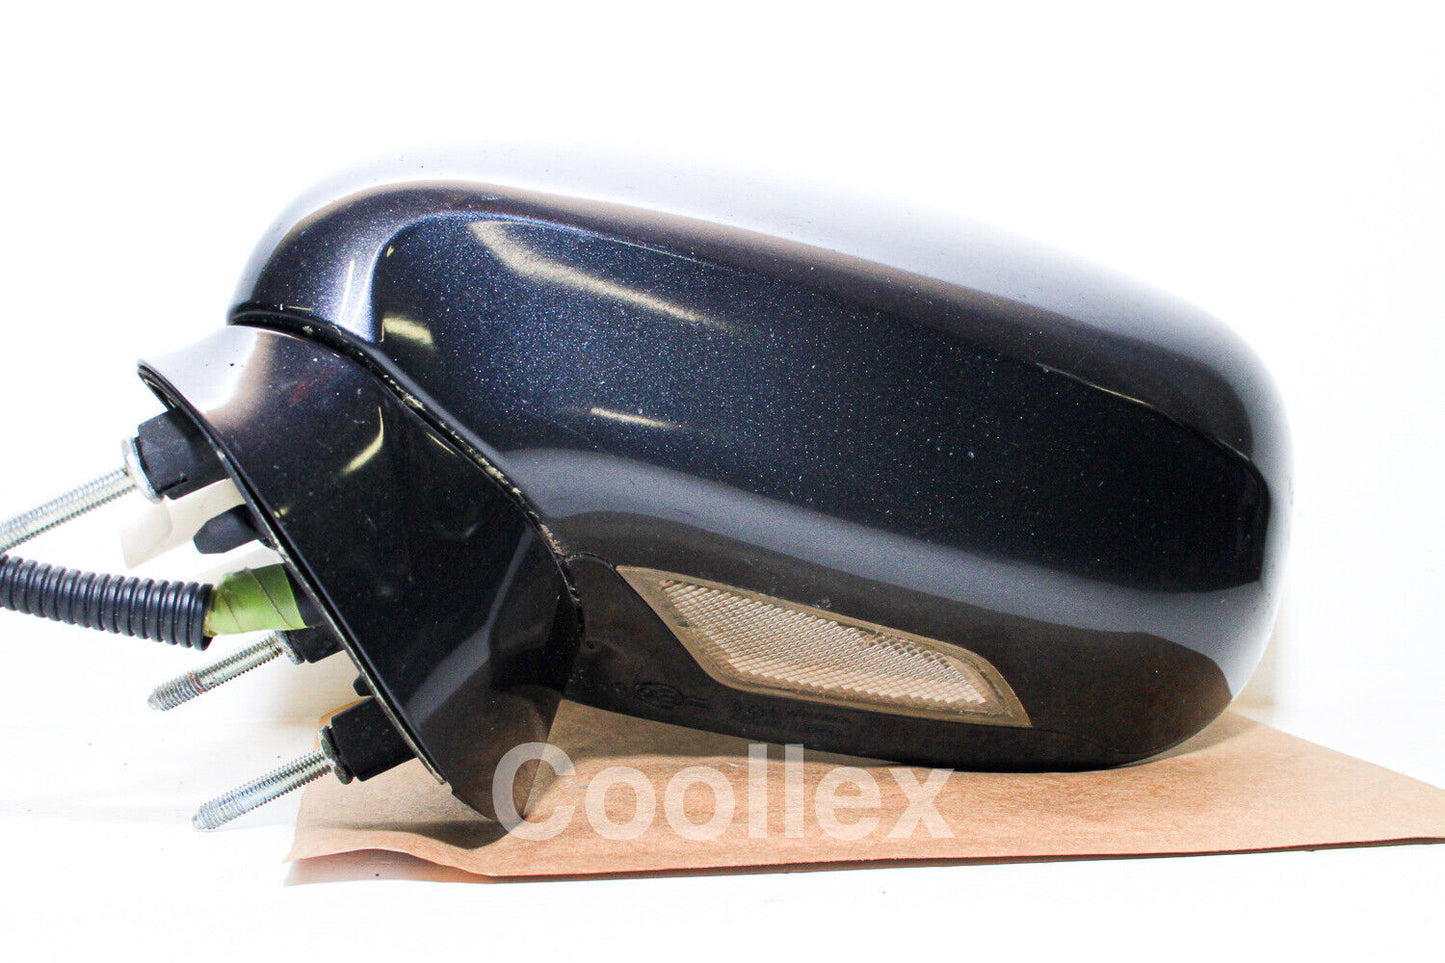 06-08 Lexus Is250 Awd Front Left Outer Rear View Mirror 87906-53100-B0 Oem